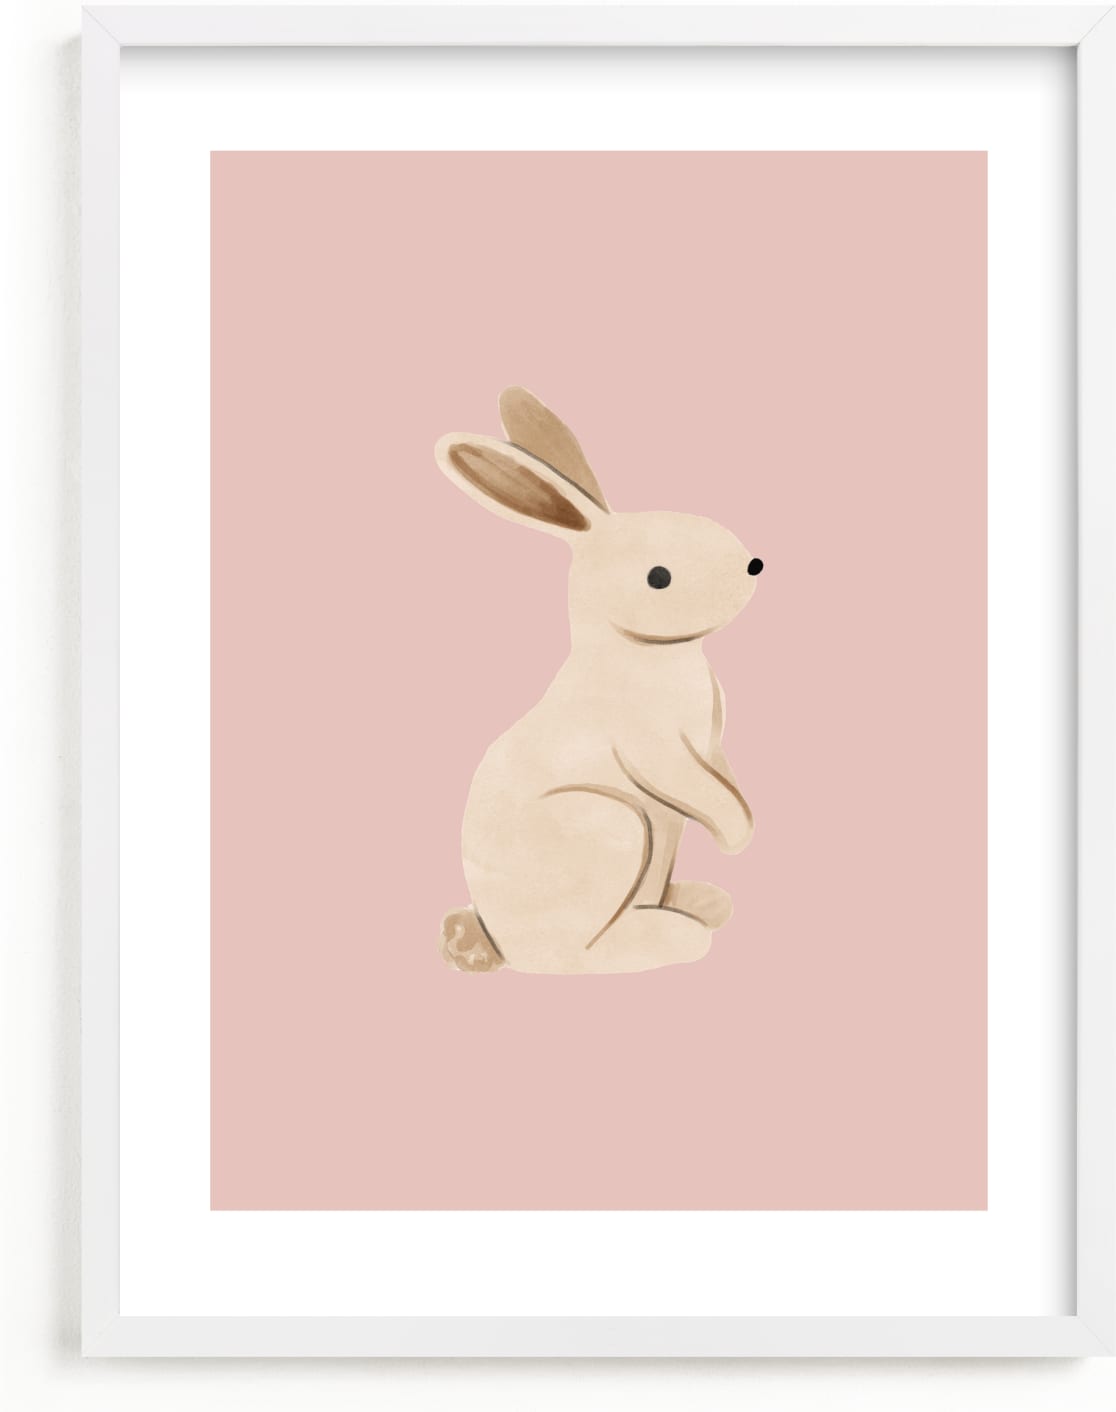 This is a brown kids wall art by Vivian Yiwing called Baby Rabbit.